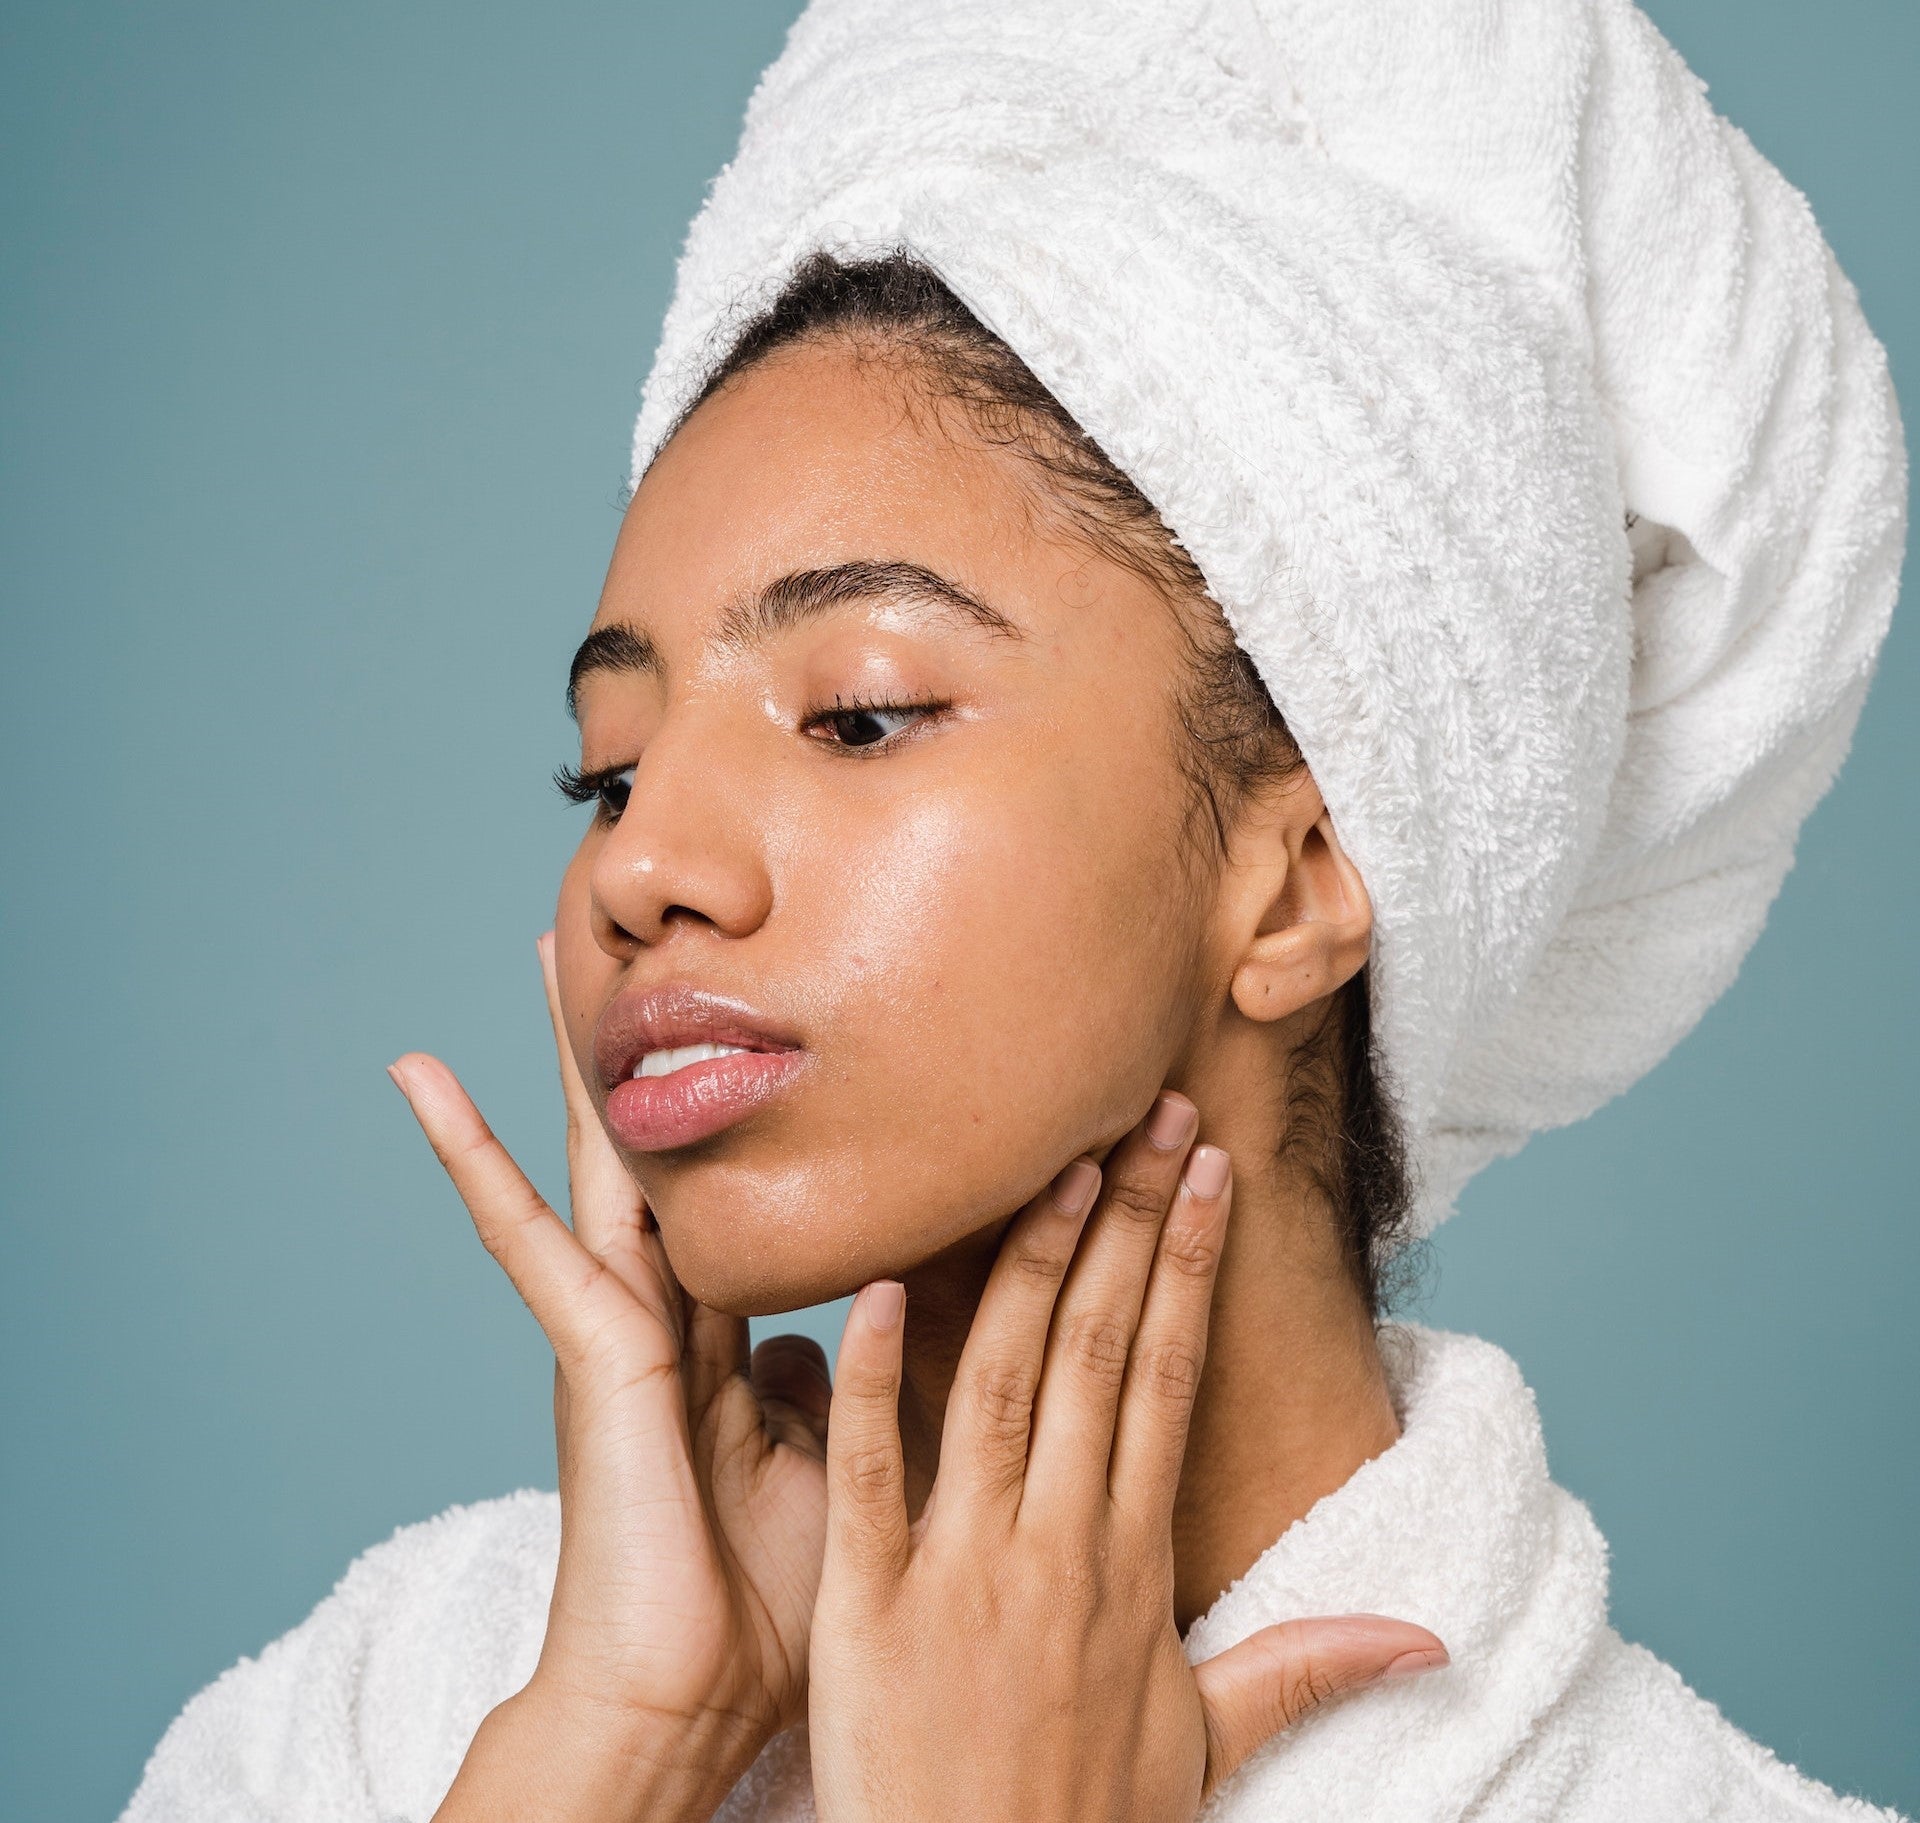 How To Restore Your Skin's pH Balance